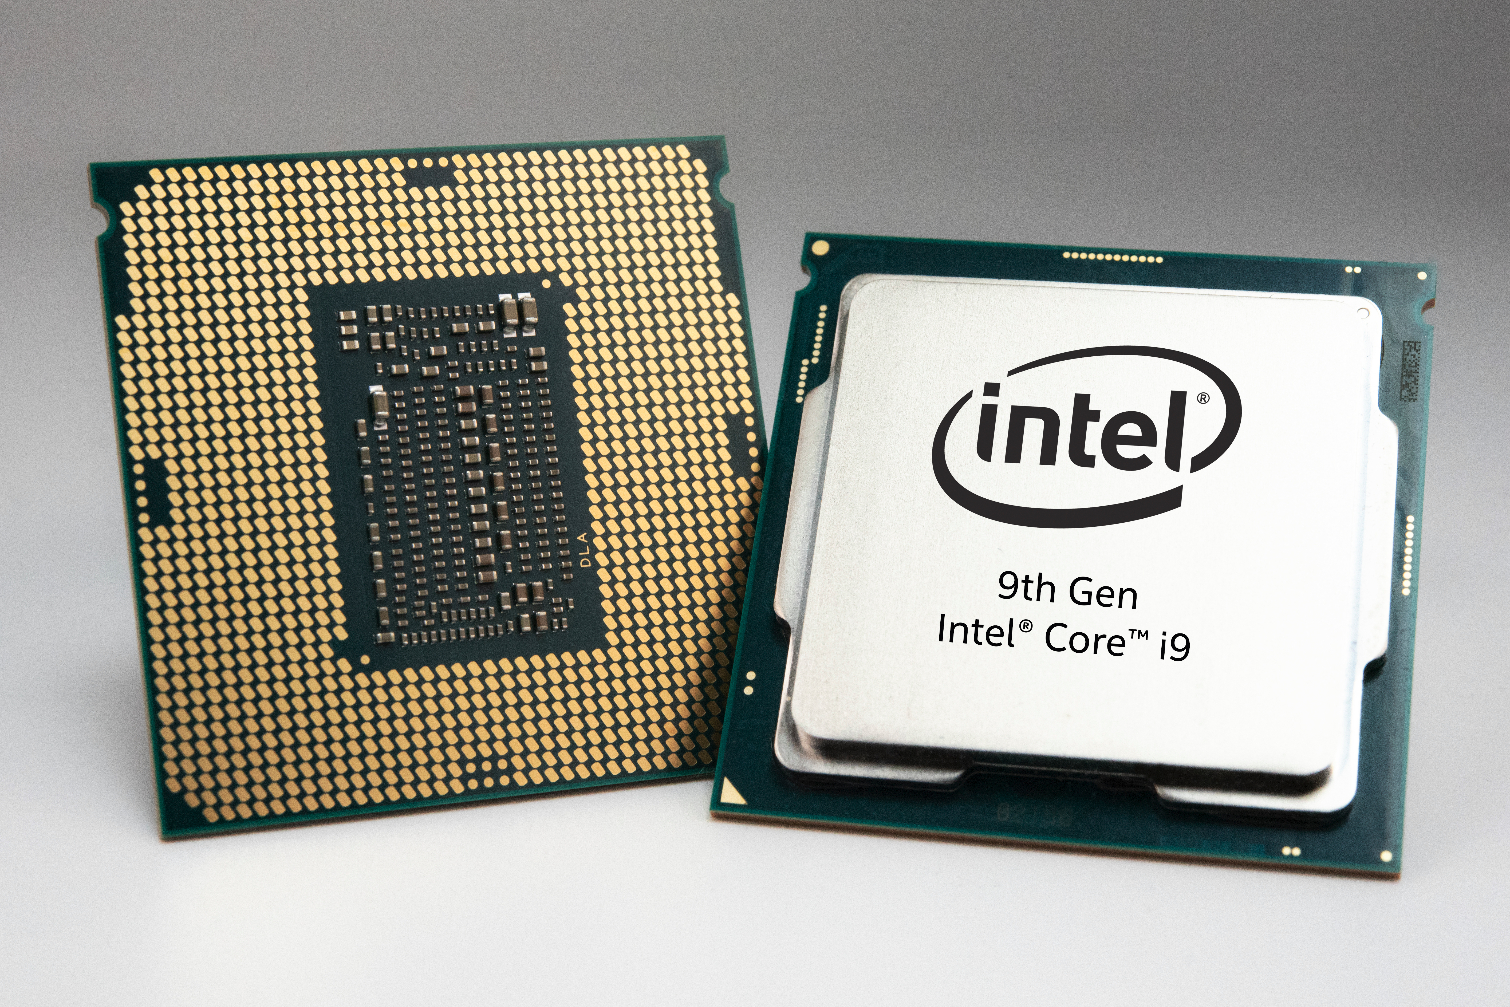 Min Oh Rechtzetten Intel Core i7-9700K 9th Gen CPU Review: Eight Cores And No Hyper-Threading  - Tom's Hardware | Tom's Hardware